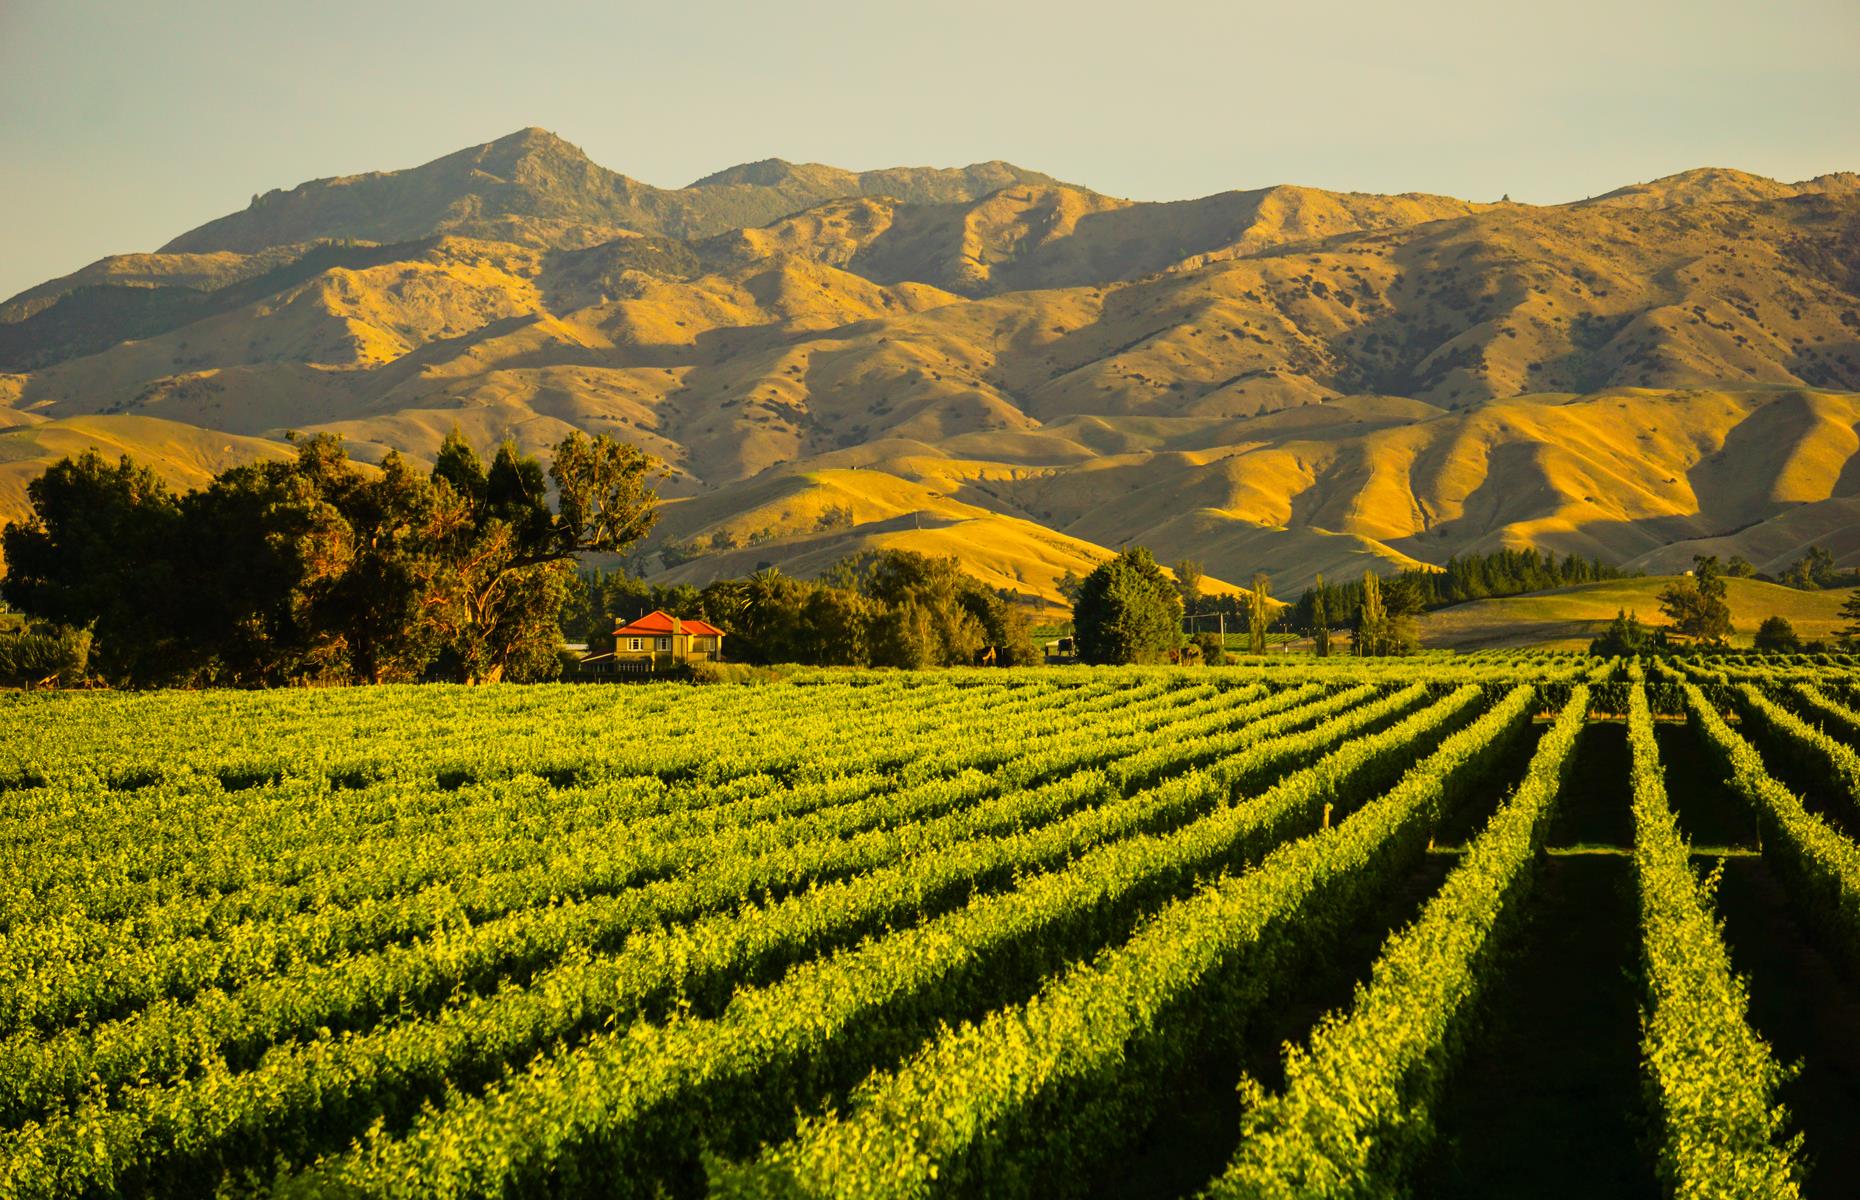 New Zealand's wine regions extend from Northland to Central Otago and tours, tastings and long lunches are practically obligatory. Marlborough wine region (pictured) is at the top of the South Island and is famous for producing world-class Sauvignon Blancs. Touring by bicycle is the perfect way to explore this gently undulating region.